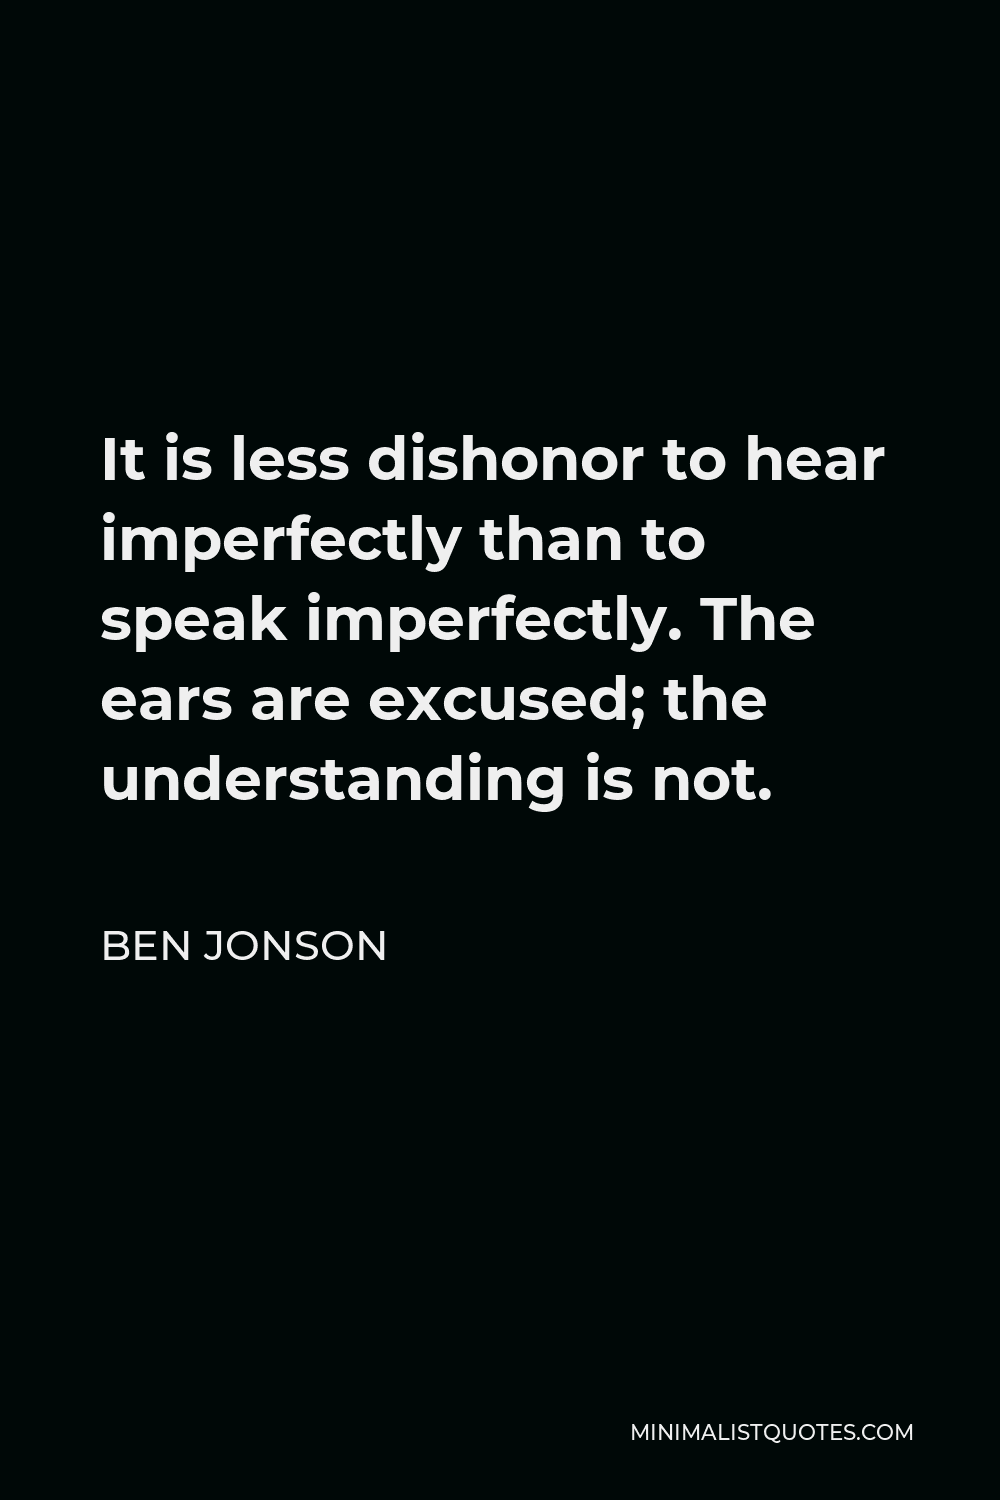 Ben Jonson Quote - It is less dishonor to hear imperfectly than to speak imperfectly. The ears are excused; the understanding is not.